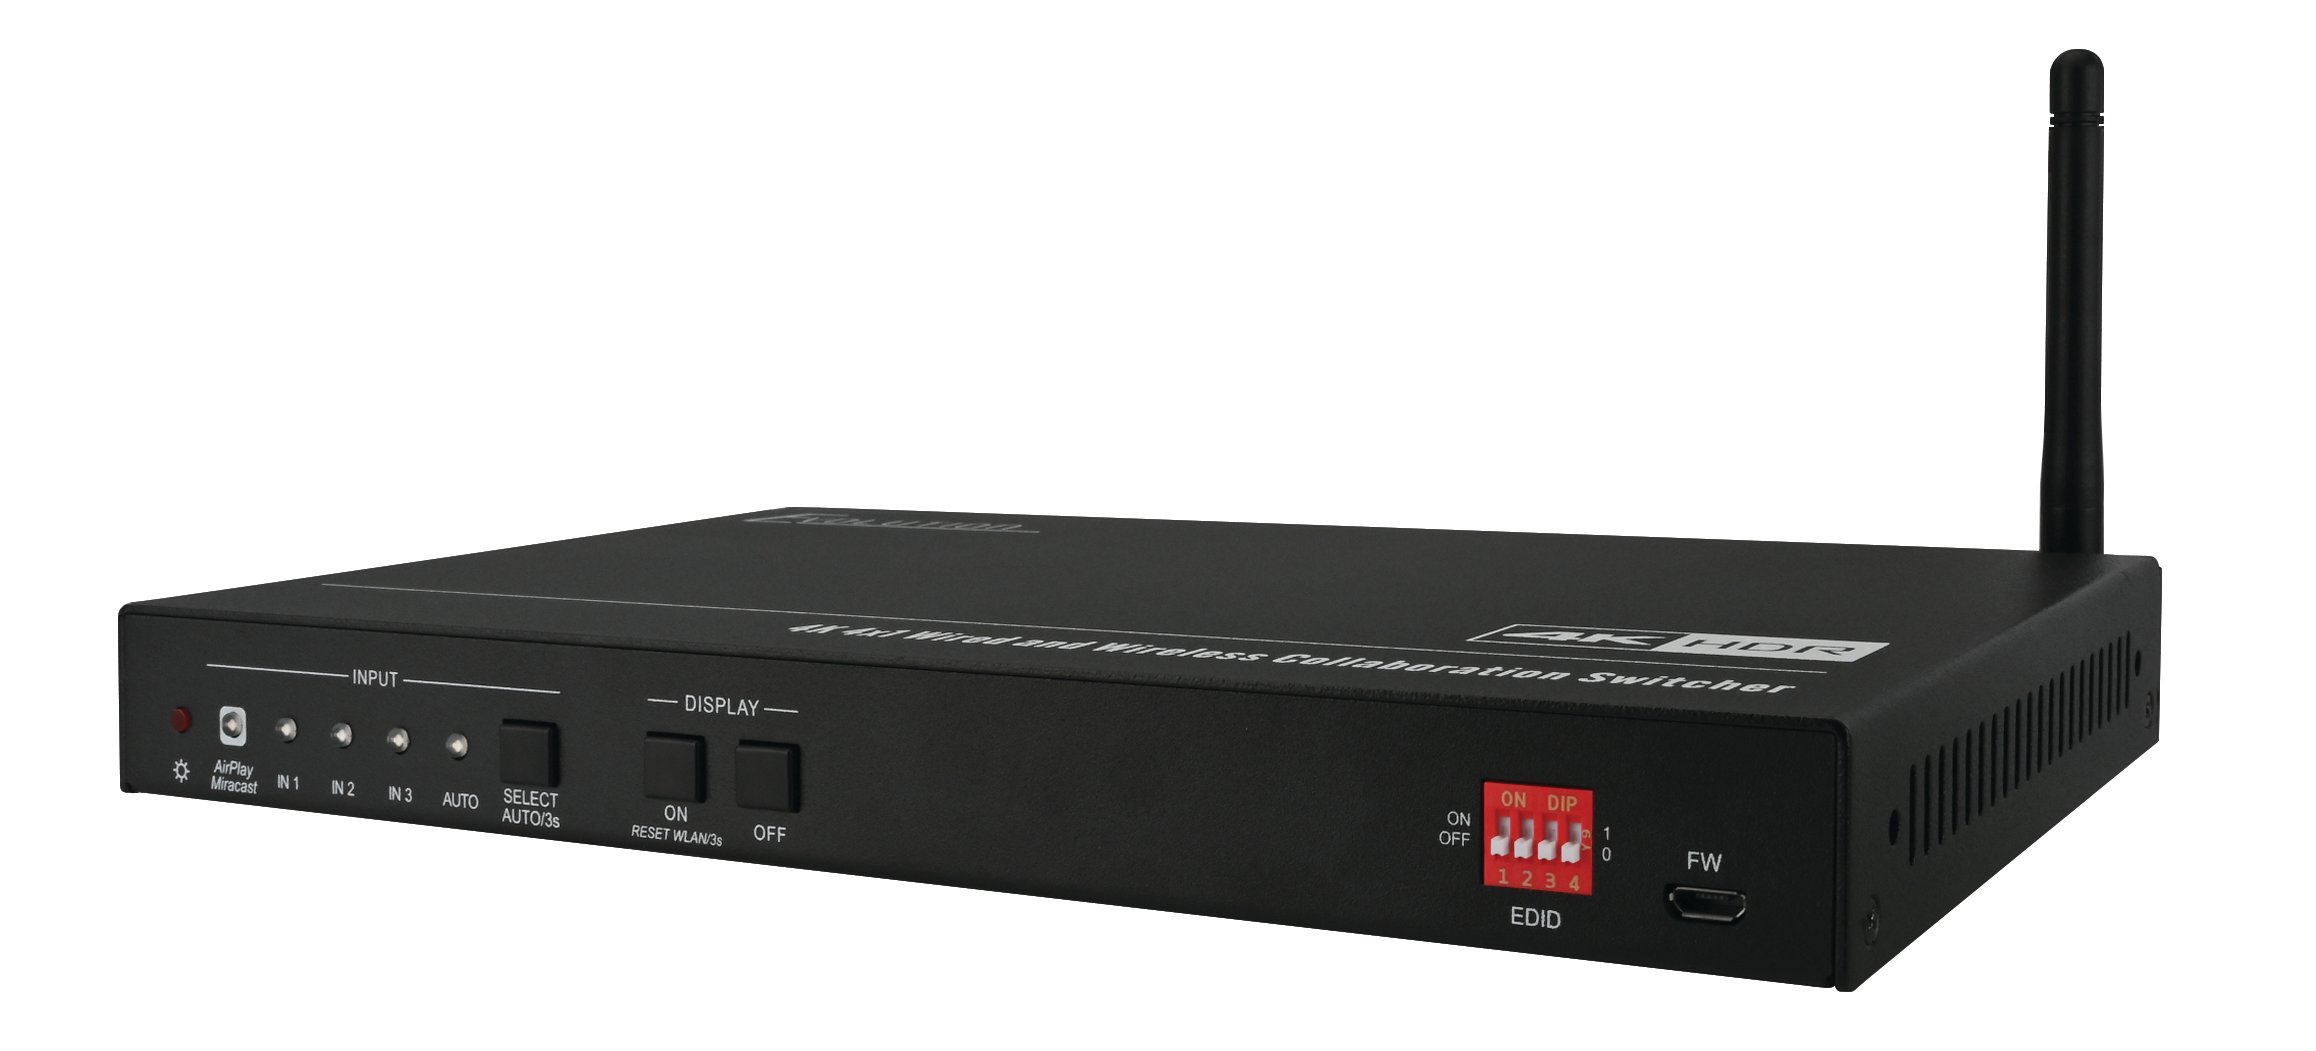 4k 4x1 Multi Format Wireless Collaboration Switcher With Wired And Wireless Connectivity